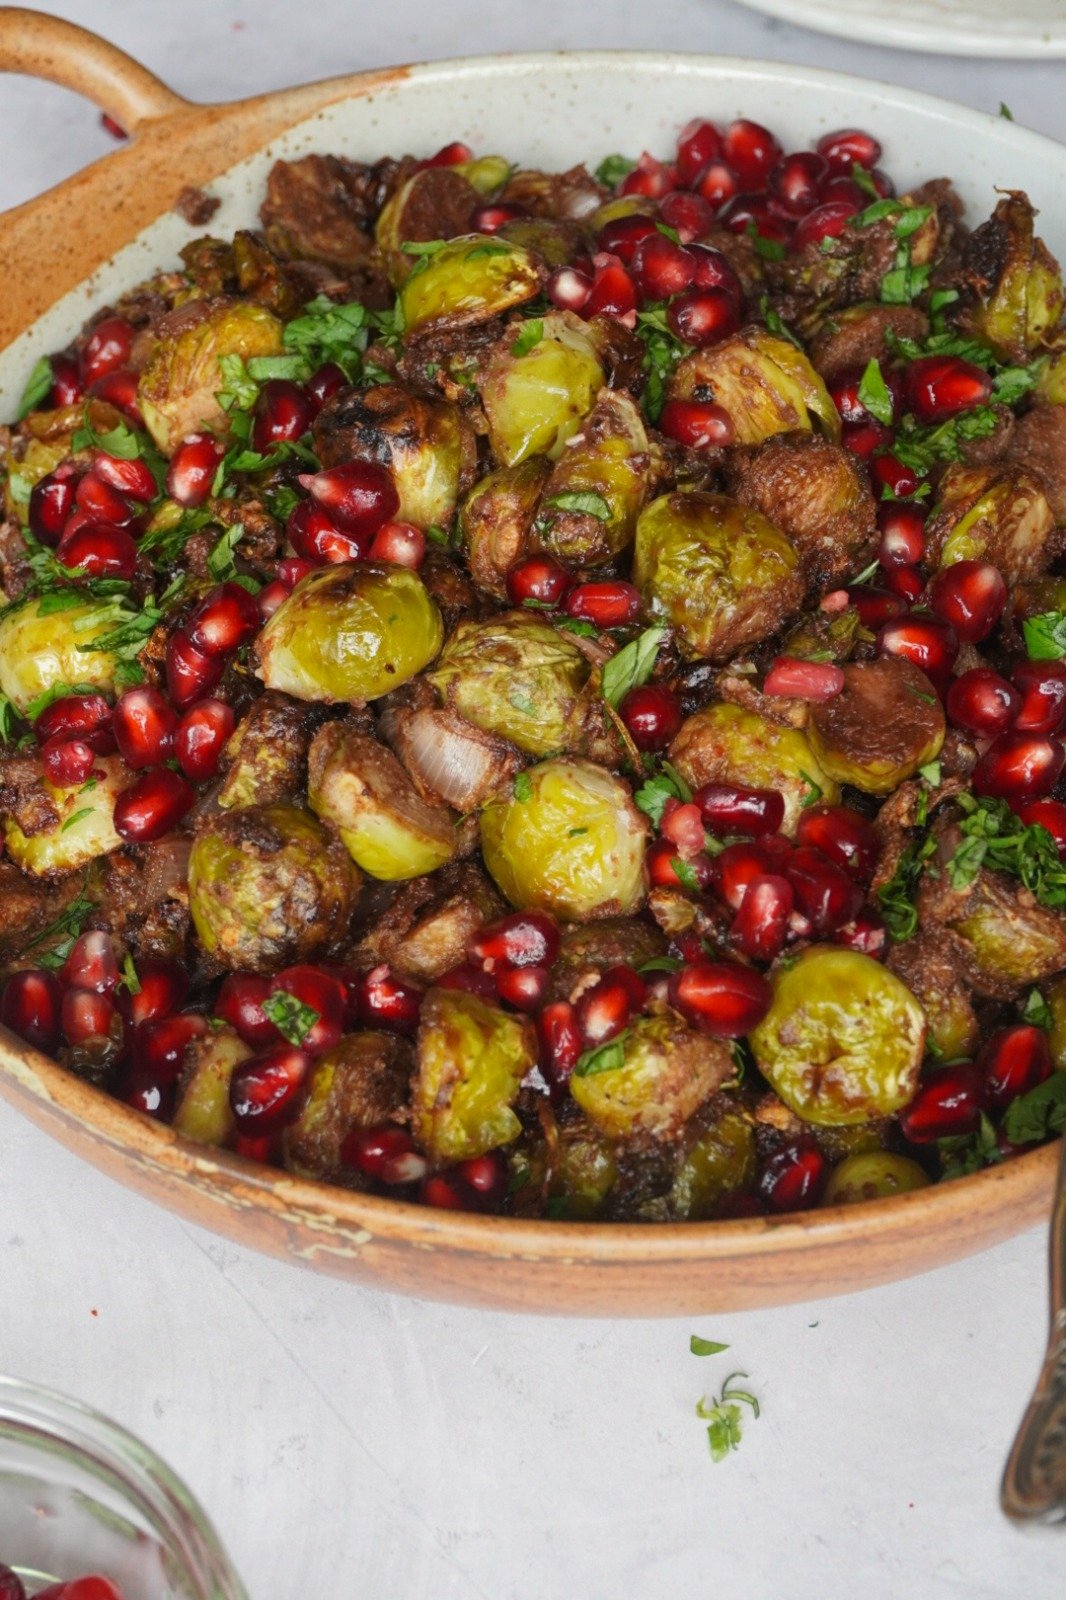 Mouthwatering roasted brussels sprouts garnished and served